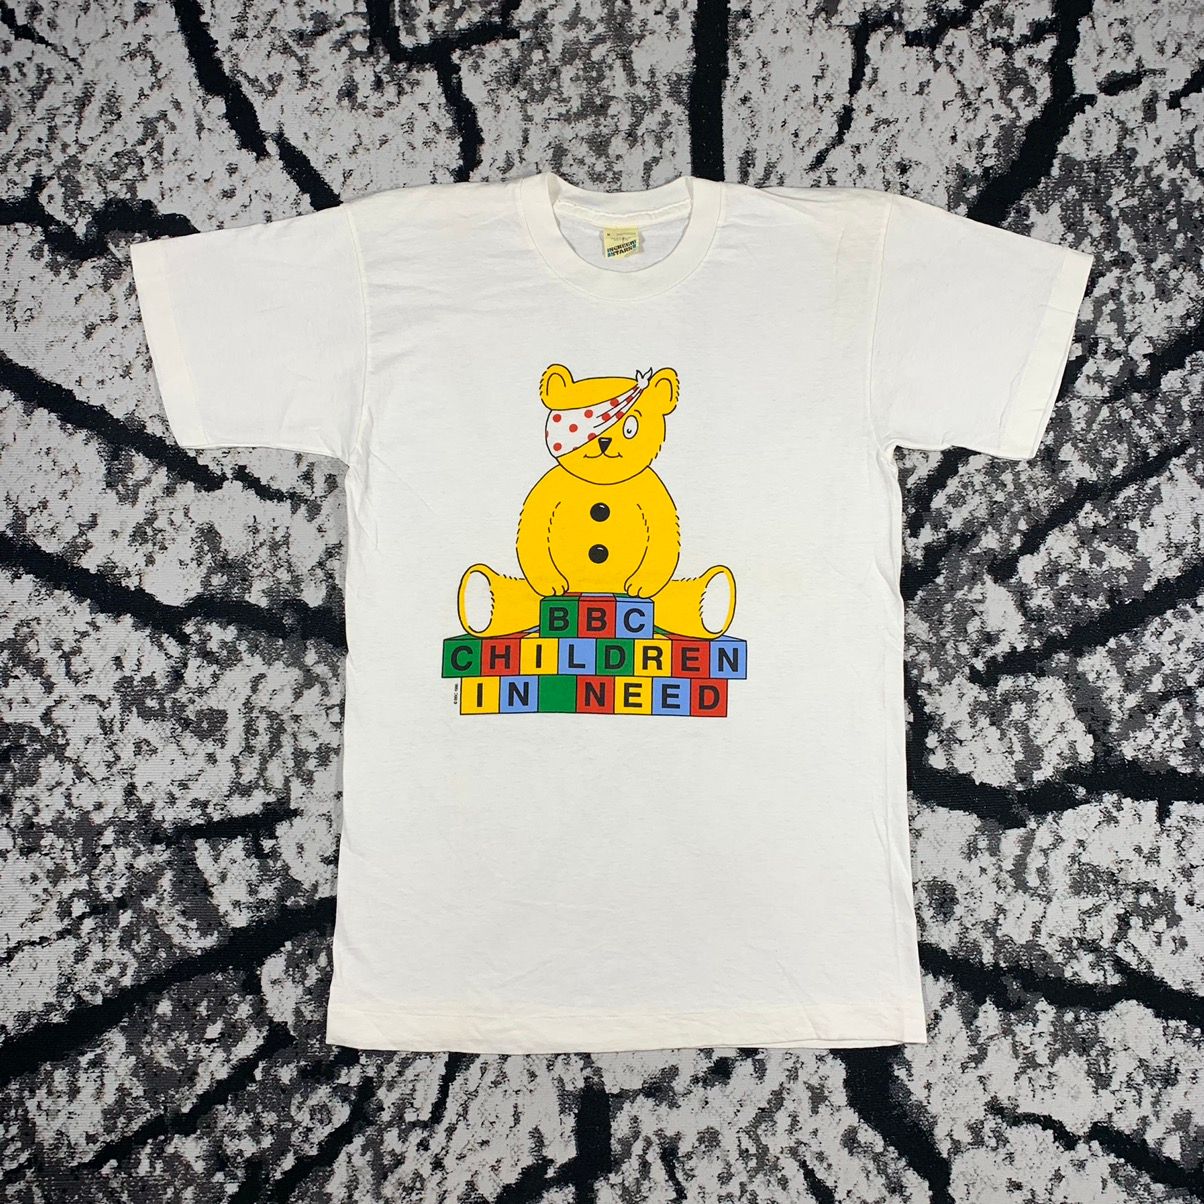 Pre-owned Humor X Vintage Crazy Vintage 1986 Bbc Children In Need Funny Tshirt Tee In White